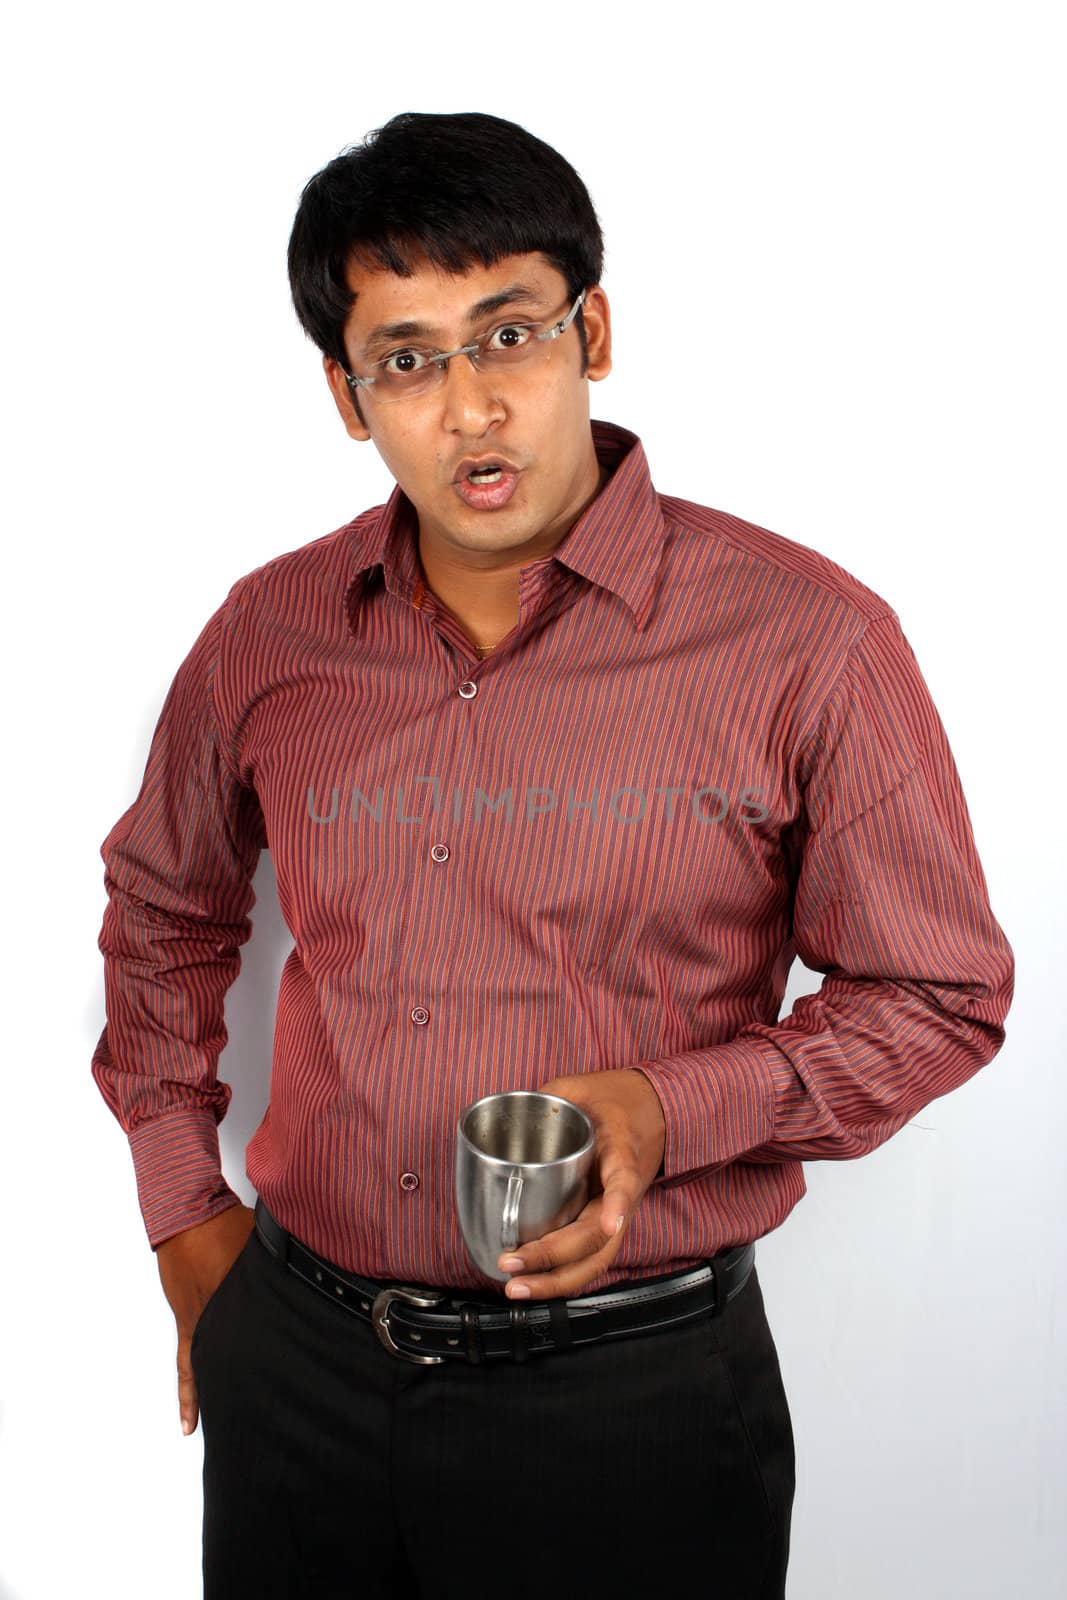 A portrait of a surprised Indian man, on white background.